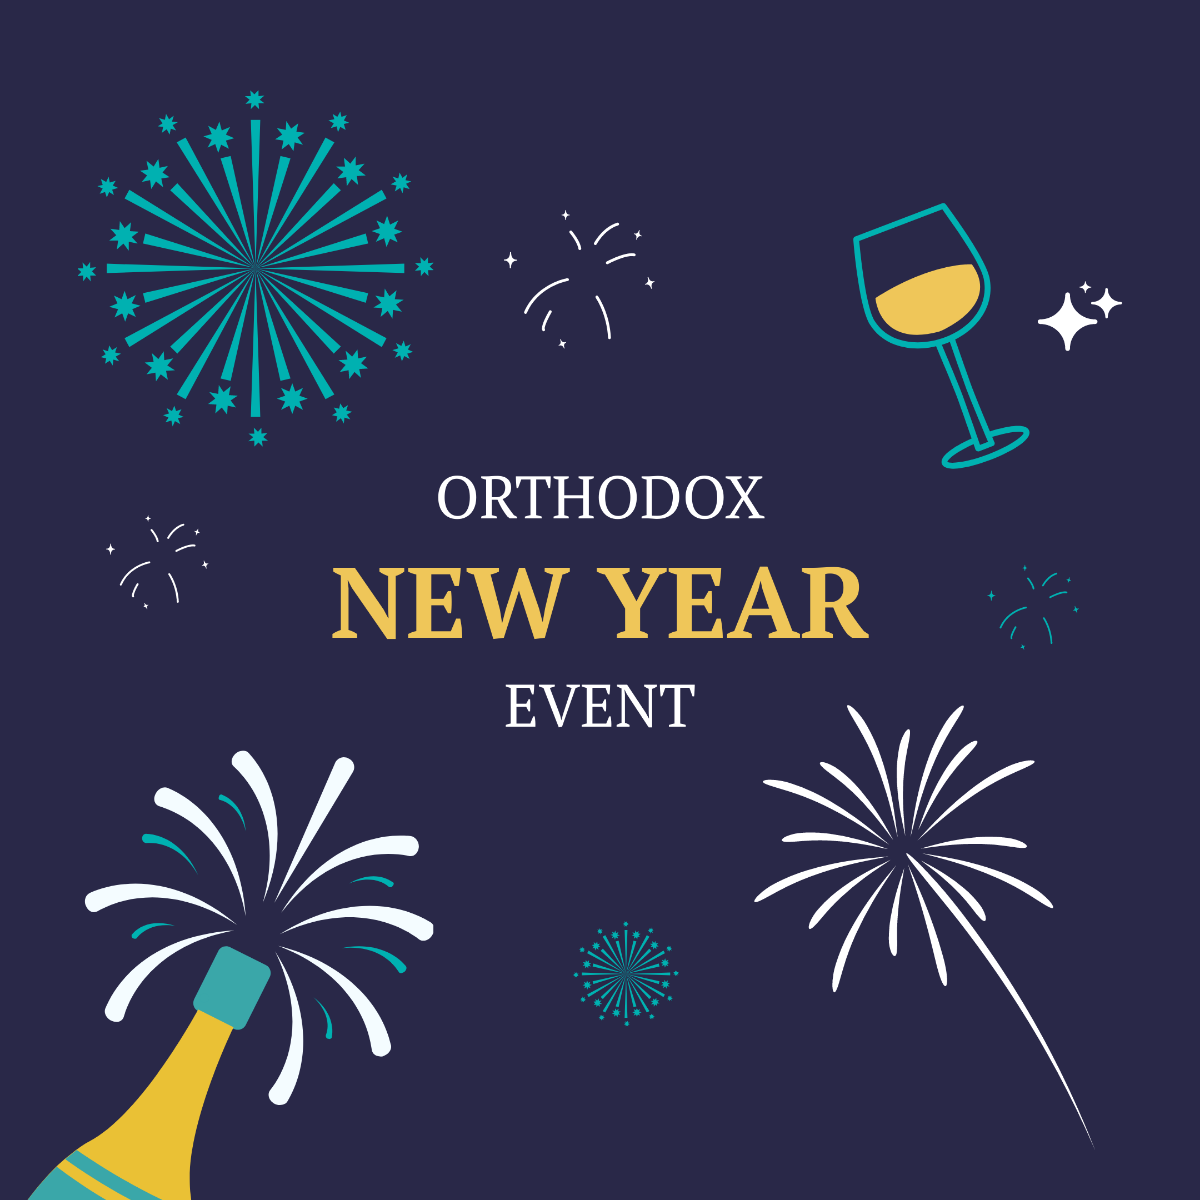 Free Orthodox New Year Event Instagram Post Template